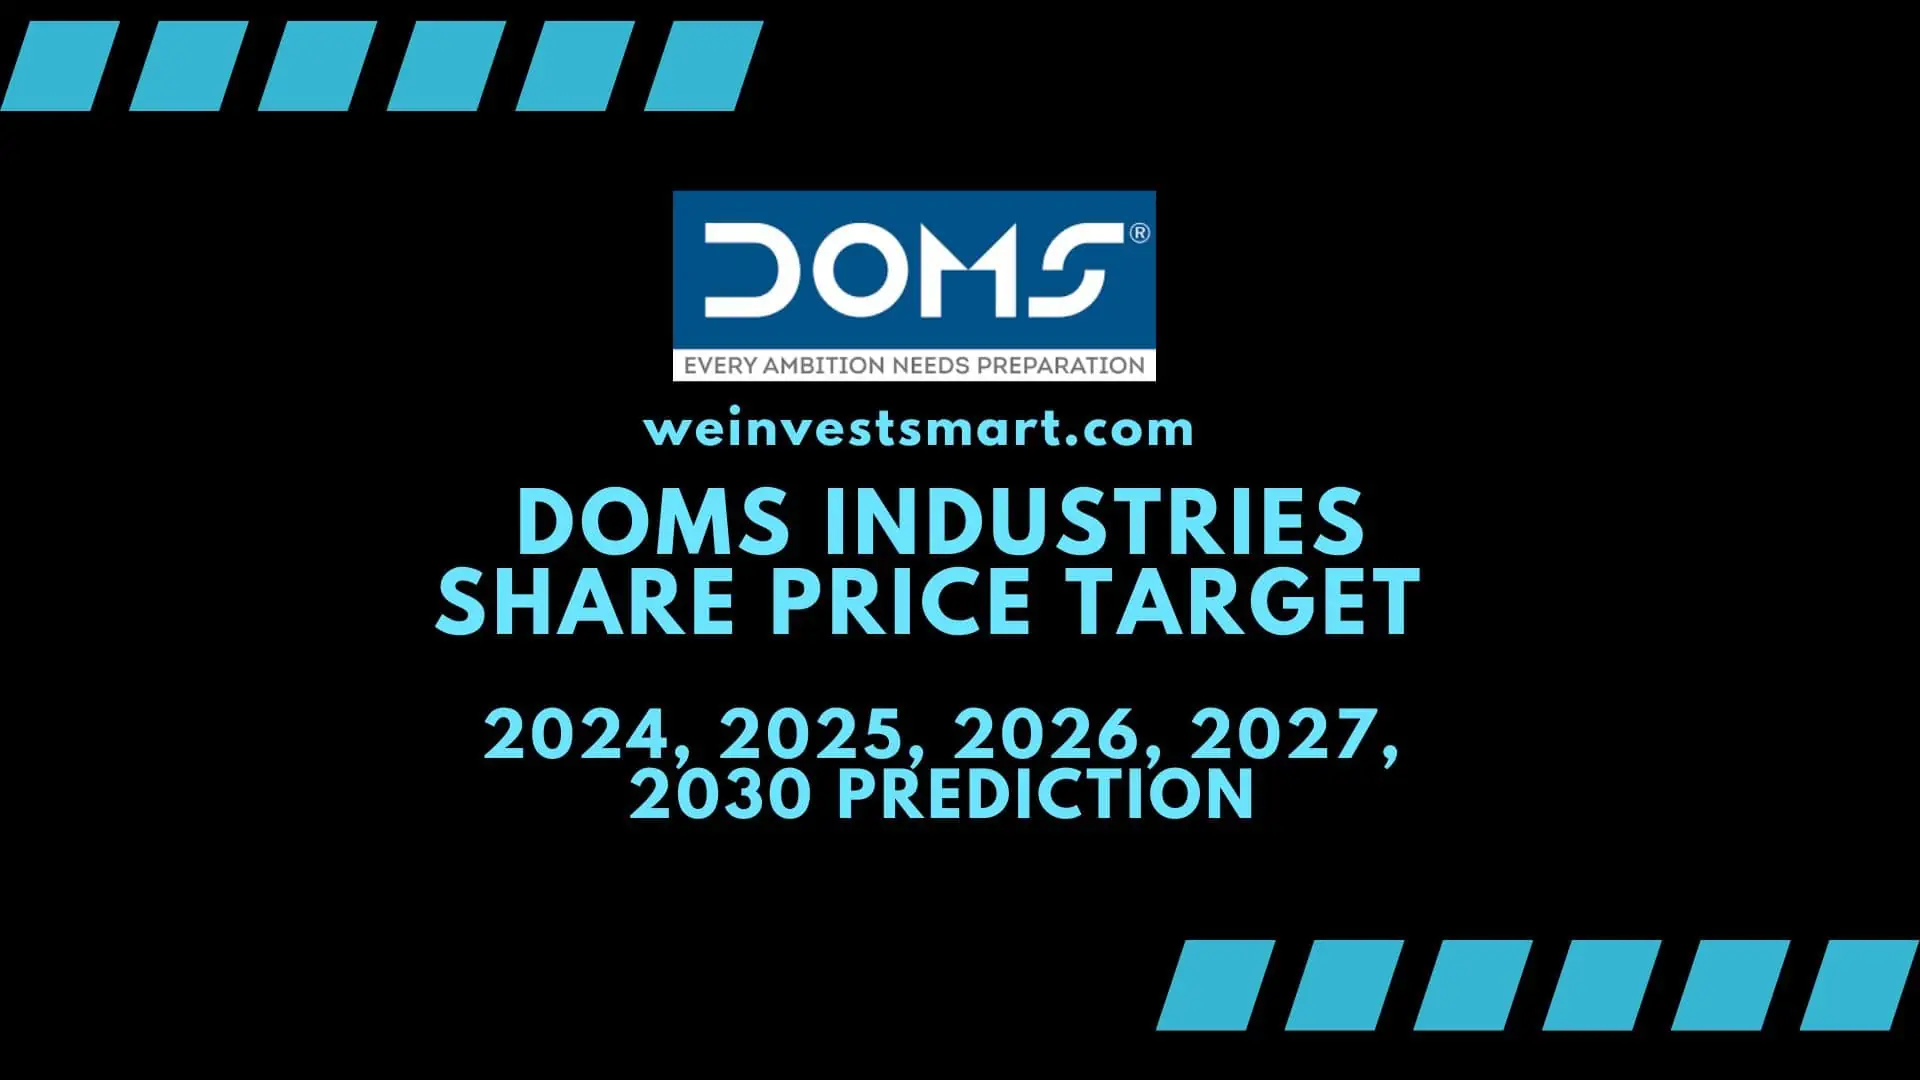 DOMS Industries Share Price Target 2024, 2025, 2026, 2027, 2030 Prediction